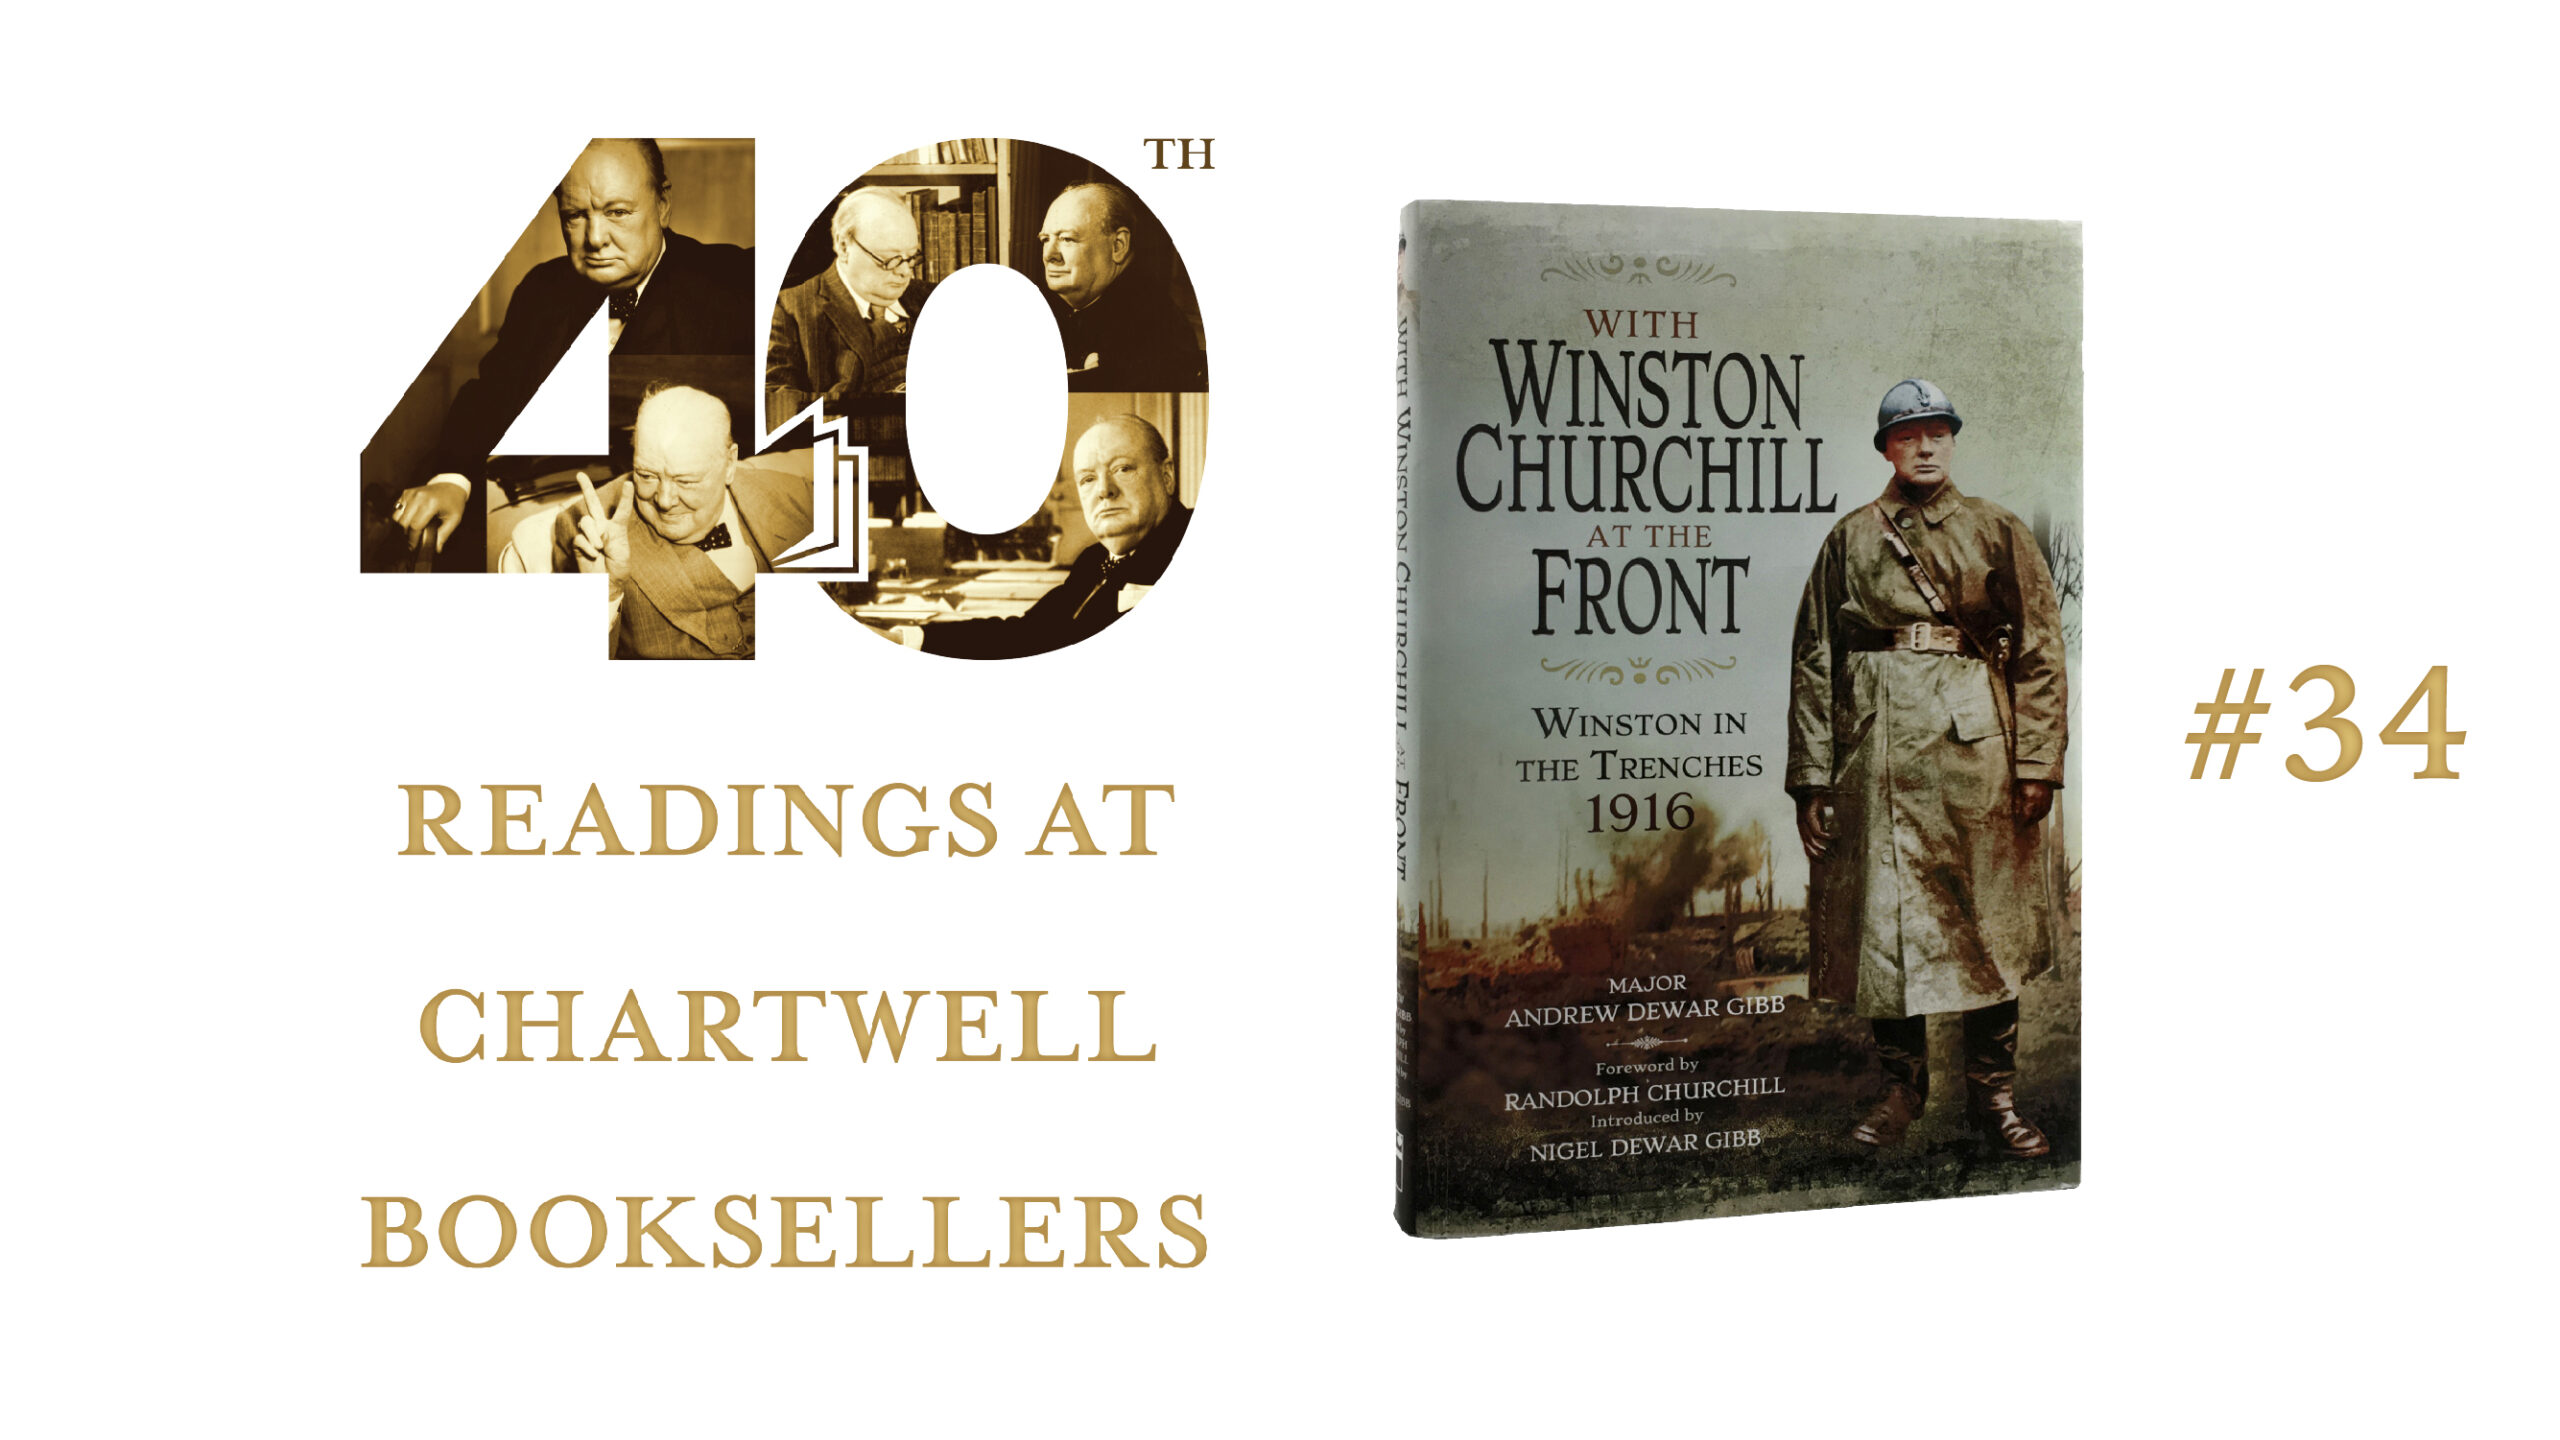 WATCH JOHN PANKOW READ “WITH WINSTON CHURCHILL AT THE FRONT” BY MAJOR ANDREW DEWAR GIBB